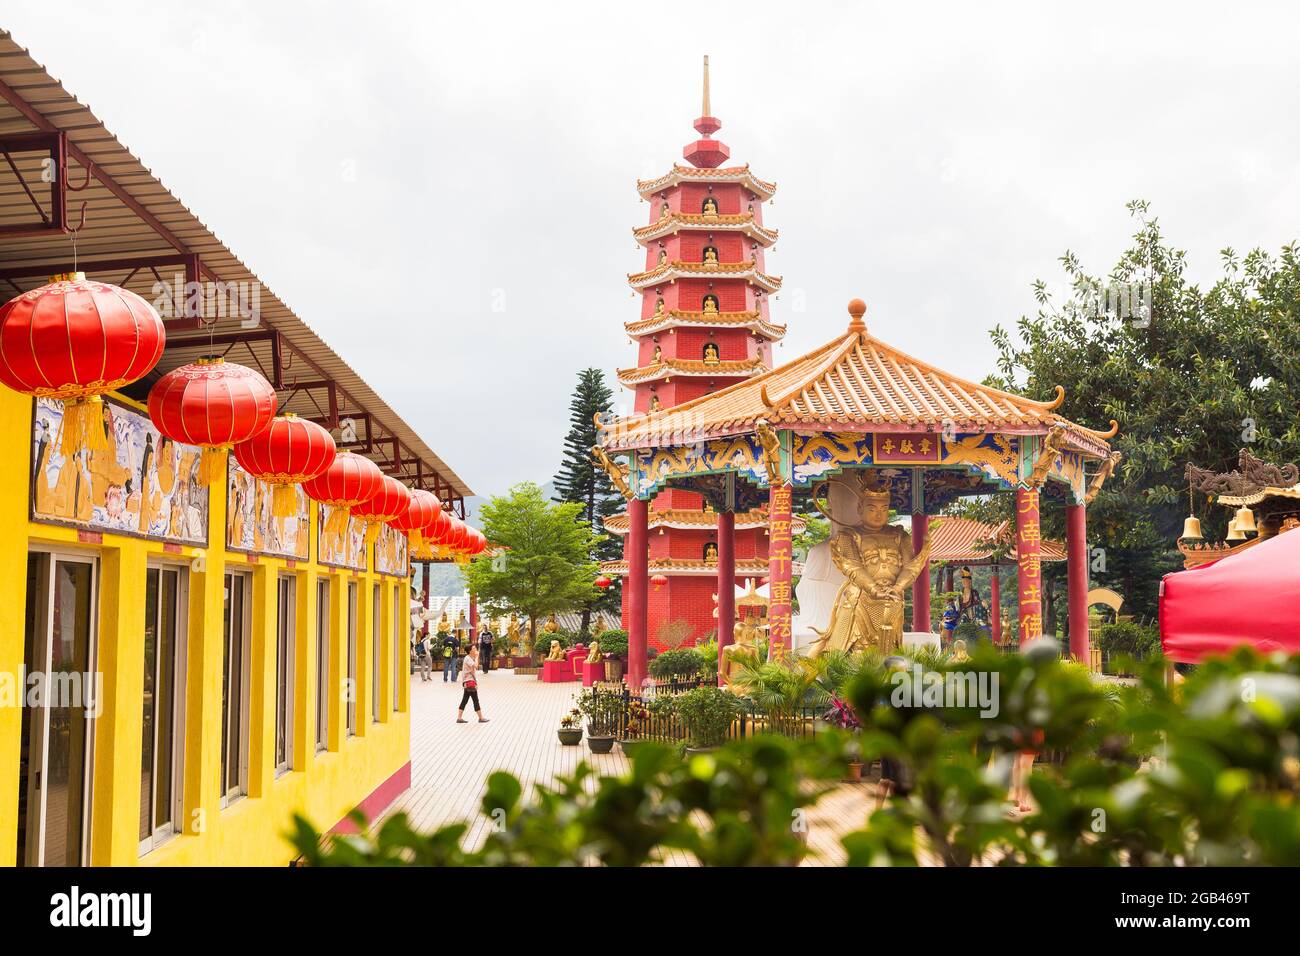 HONG KONG - 10TH APRIL, 2017: Temples and buddhas at Ten Thousand Buddhas Monastery, located in Sha Tin, Hong Kong. People can be seen Stock Photo